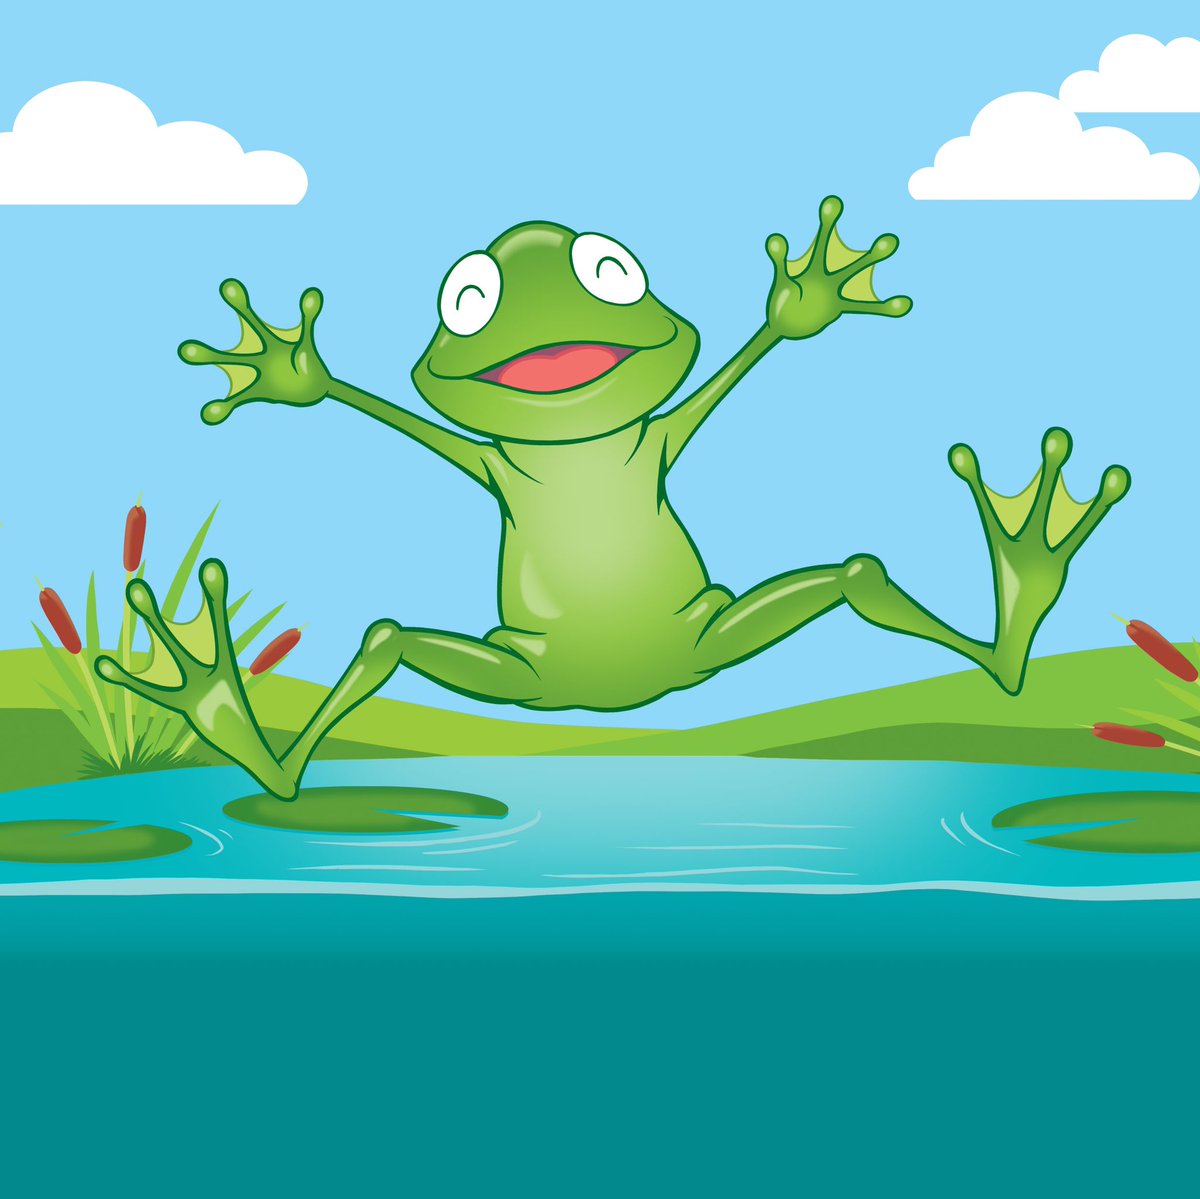 🐸 It’s a leap year and we’re busy creating hand illustrated visitor resources for the year ahead. This leaping frog was created for signage @houghtonhall #leapyear #illustration #trailsheets #actvitysheets #activitypacks #signage #illustratedmap #characterdesign